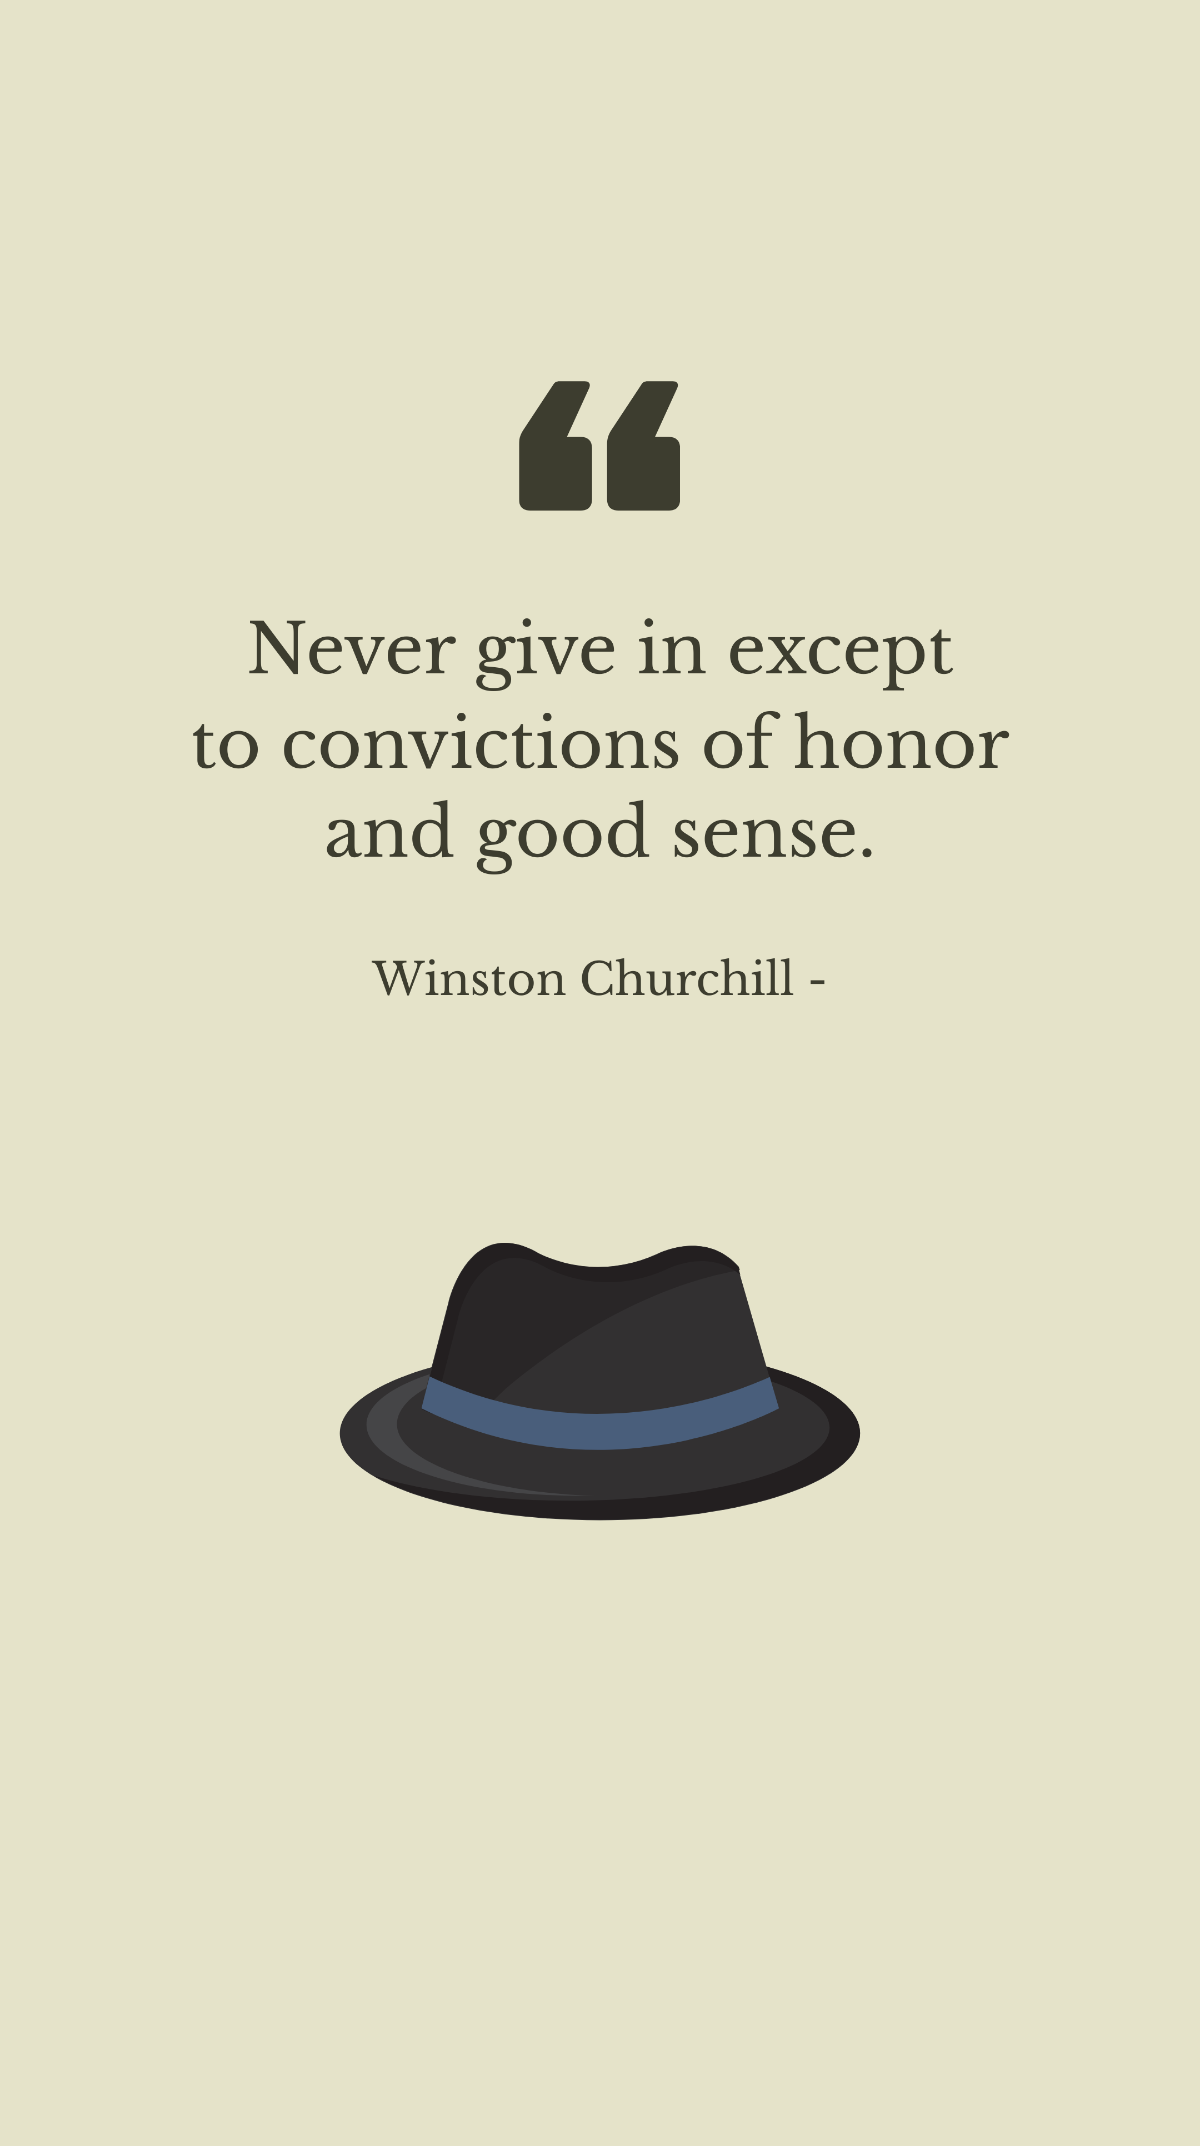 Free Winston Churchill - Never give in except to convictions of honor and good sense. Template